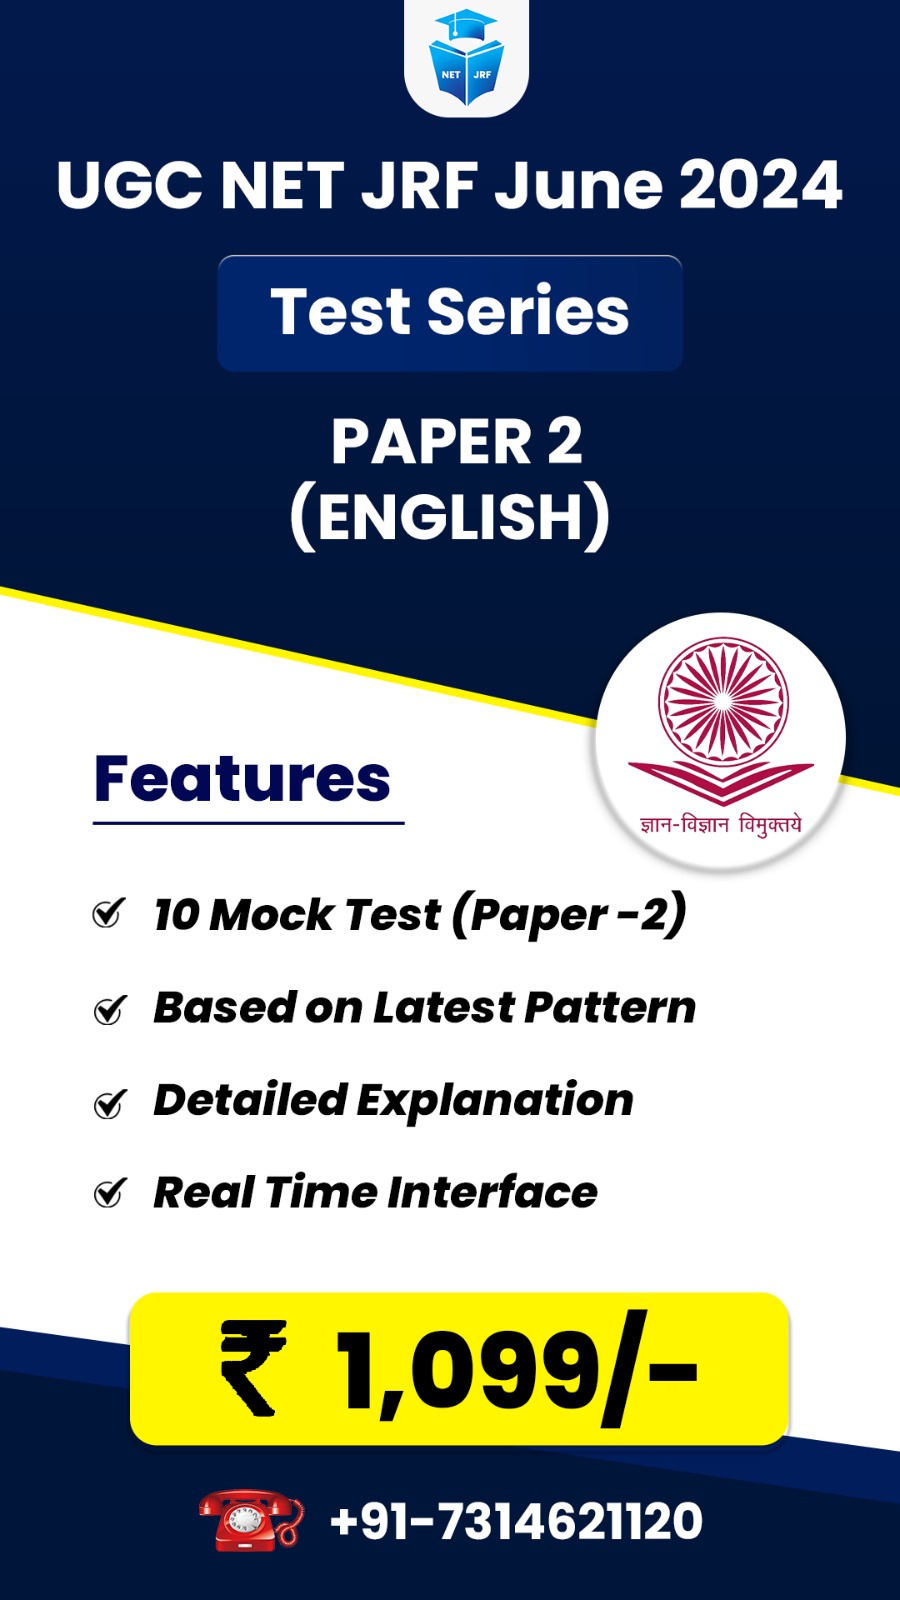 English (Paper 2) Test Series for June 2024